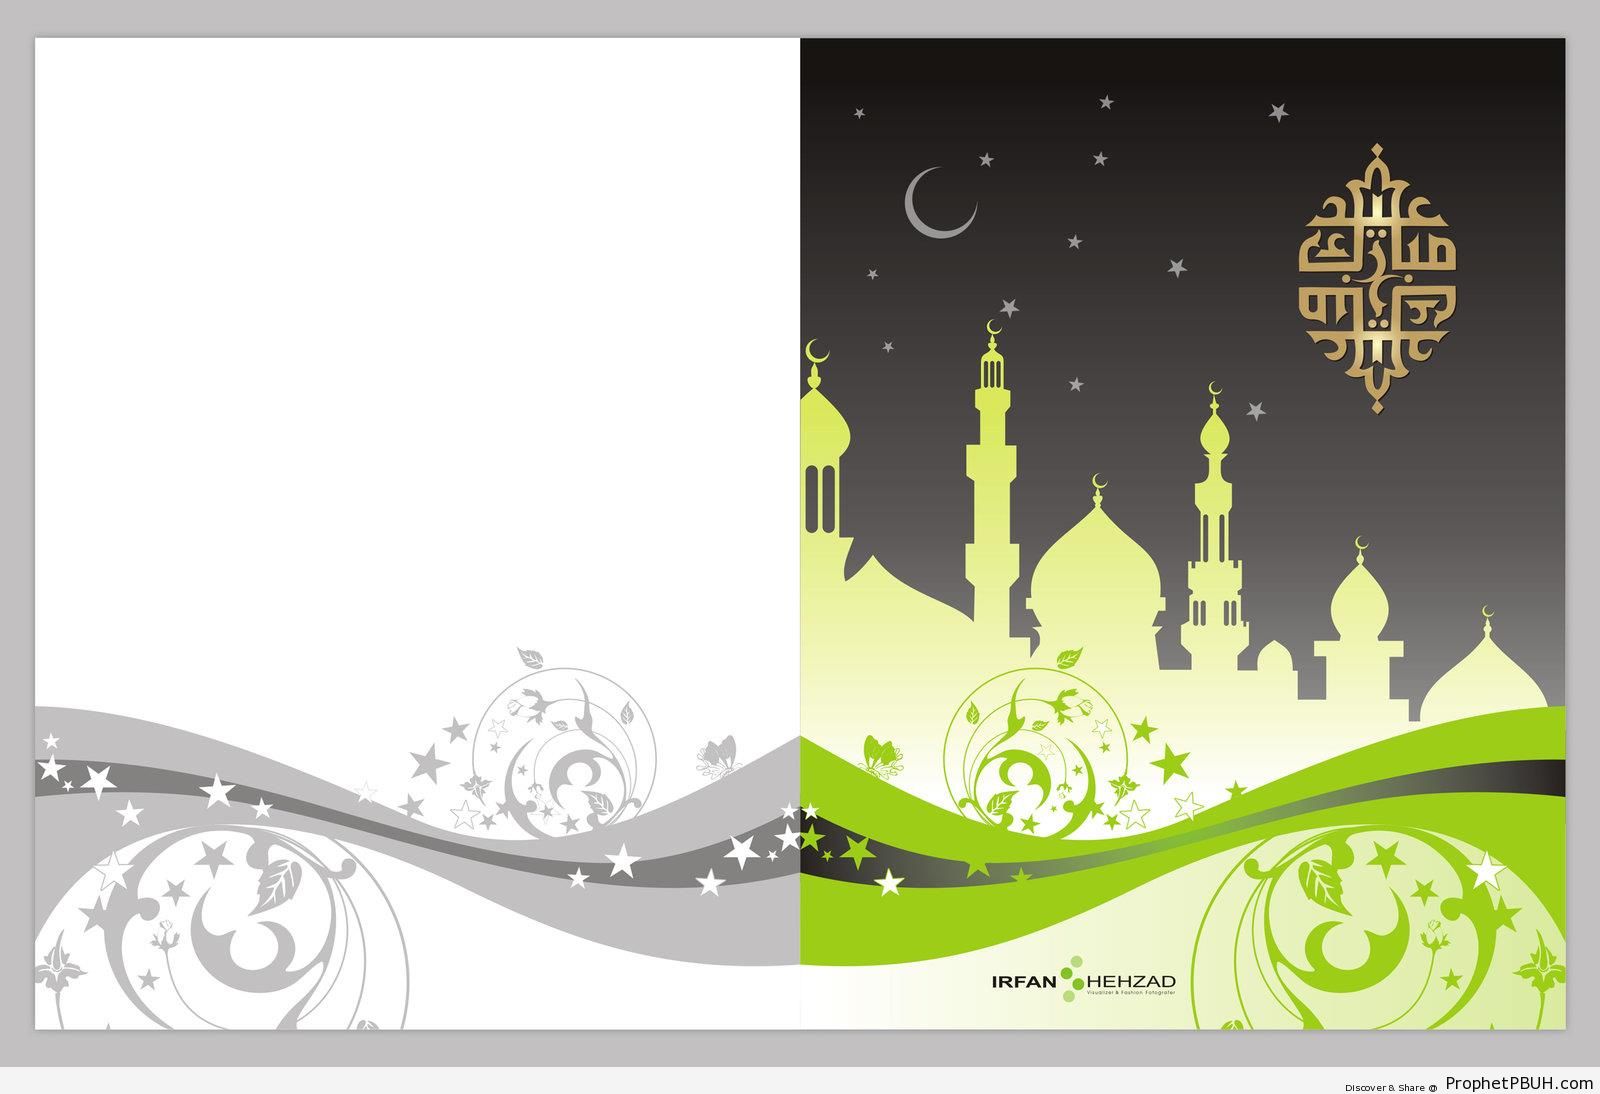 Gold Eid Mubarak Greeting Calligraphy on Illustration of Mosque and Night Sky - Drawings of Crescent Moons 